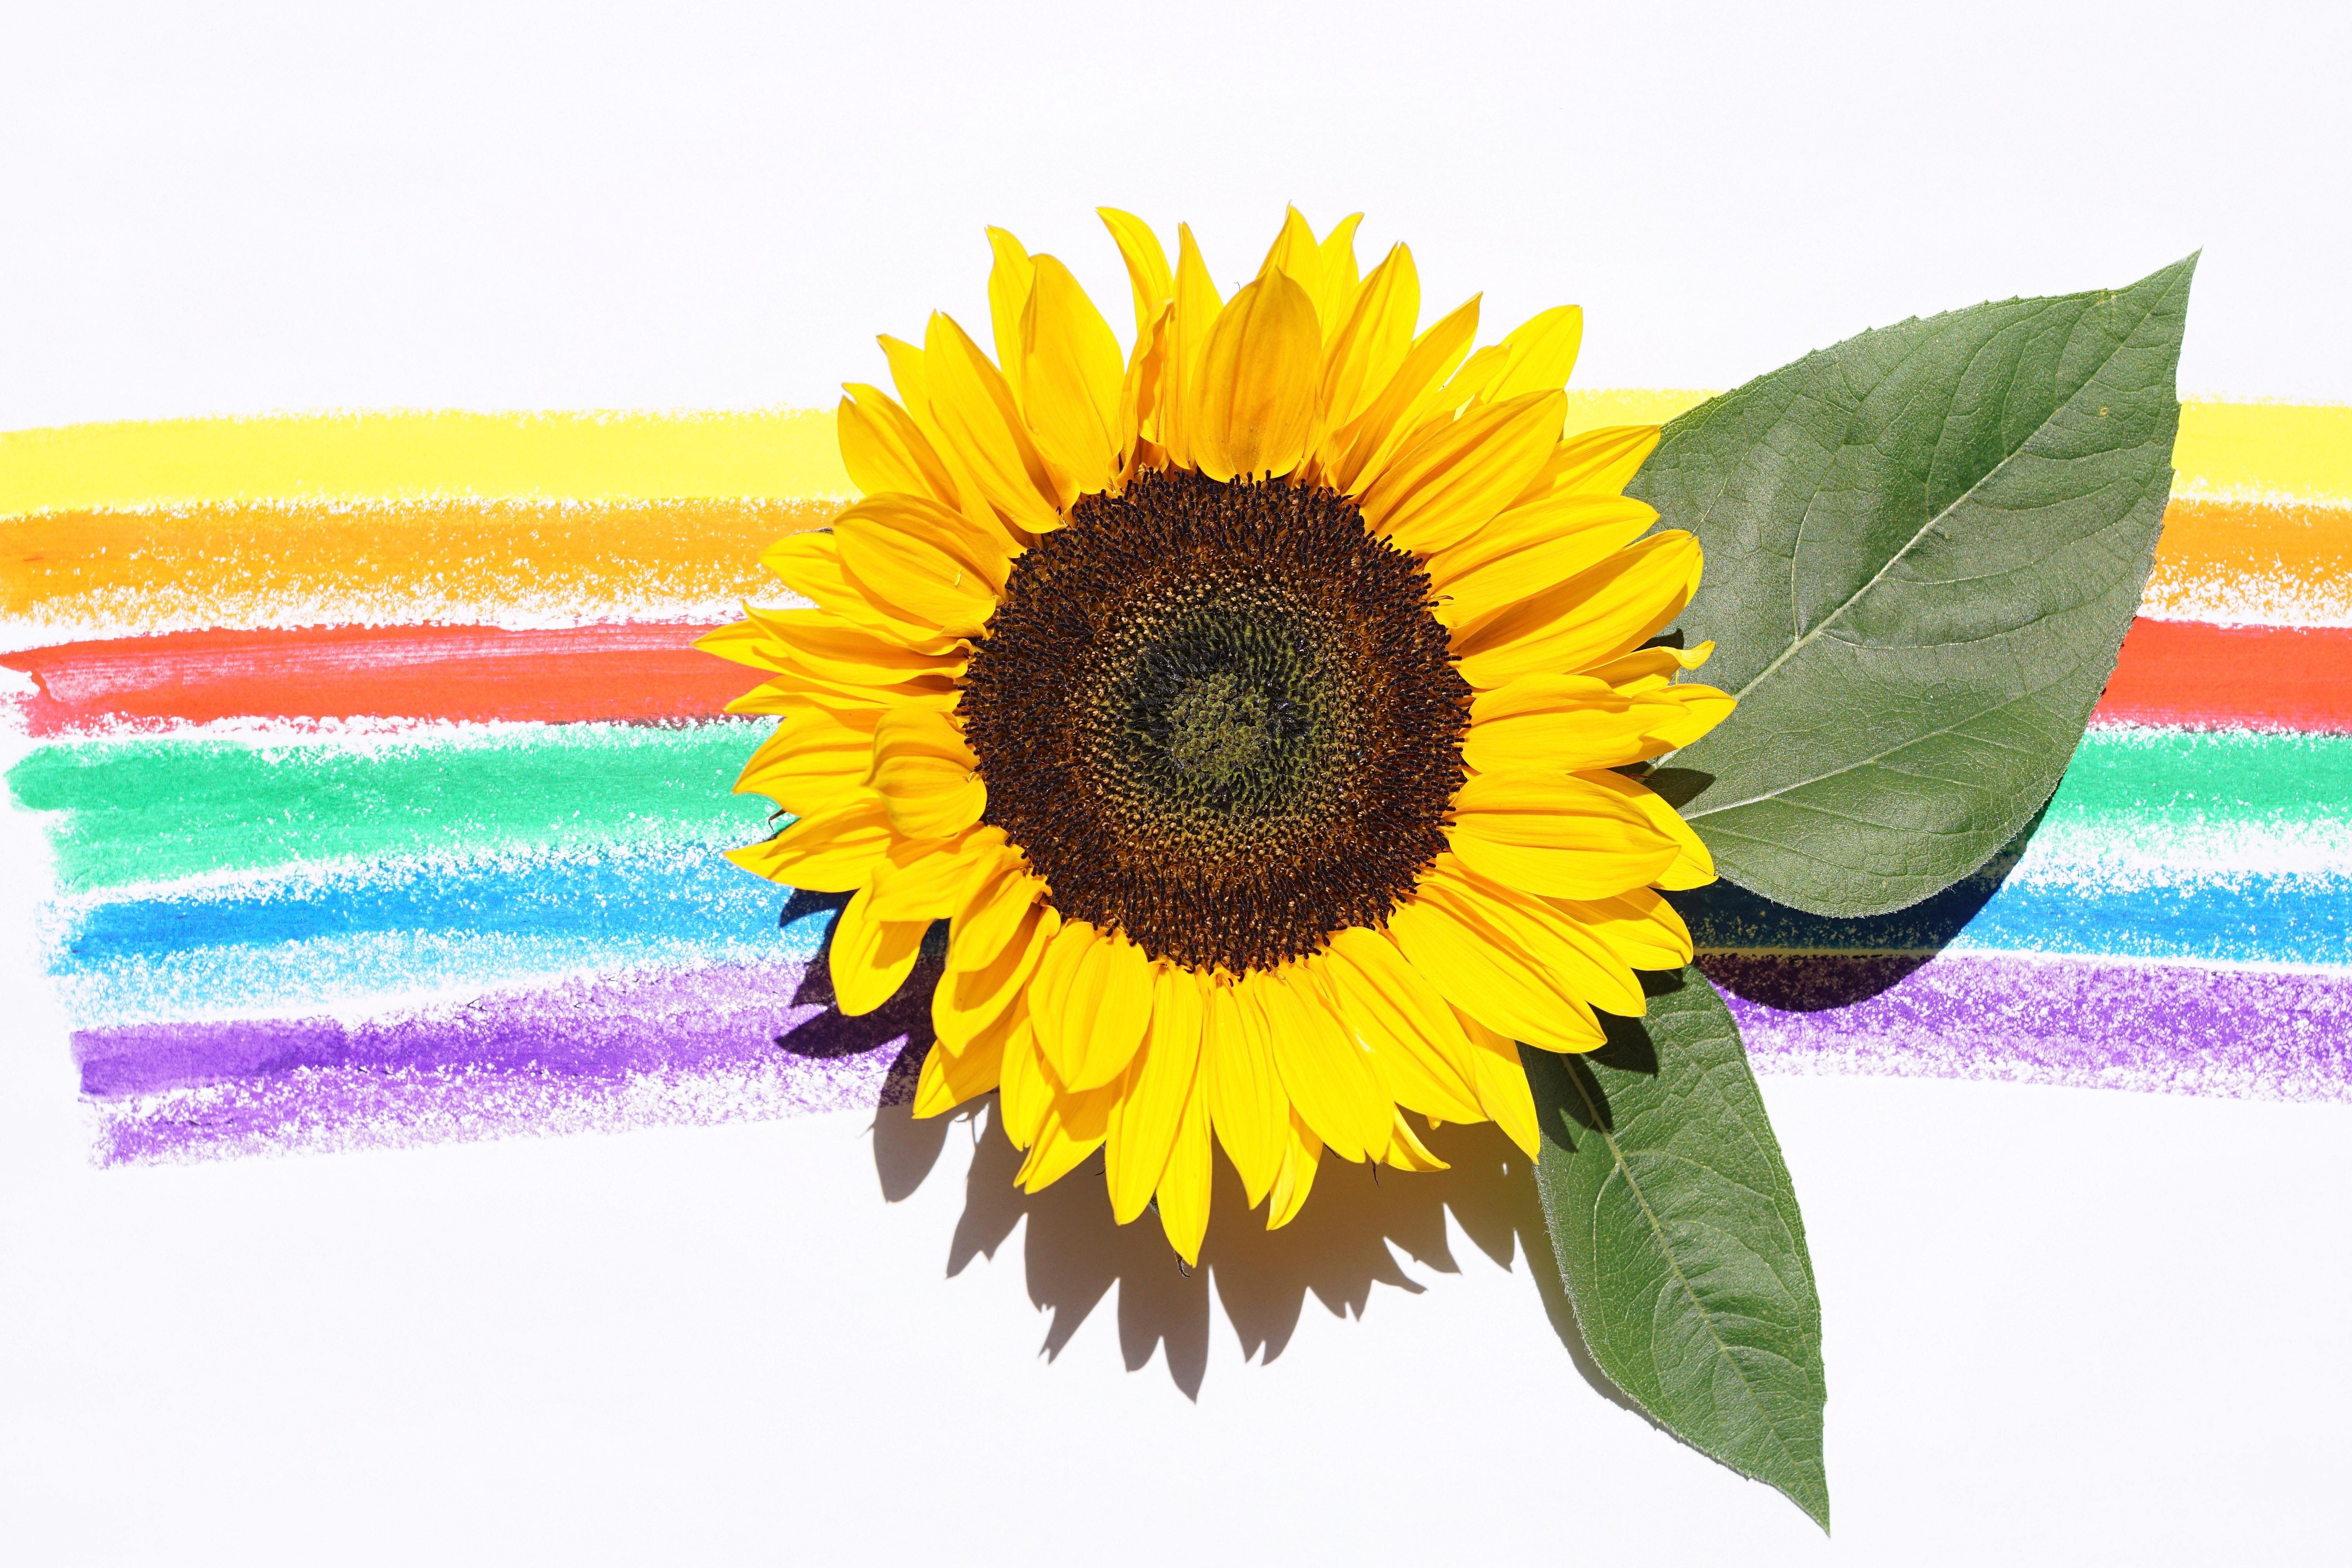 Image: Sunflower, yellow, leaves, stripes, colored, colorful, contrast, white background